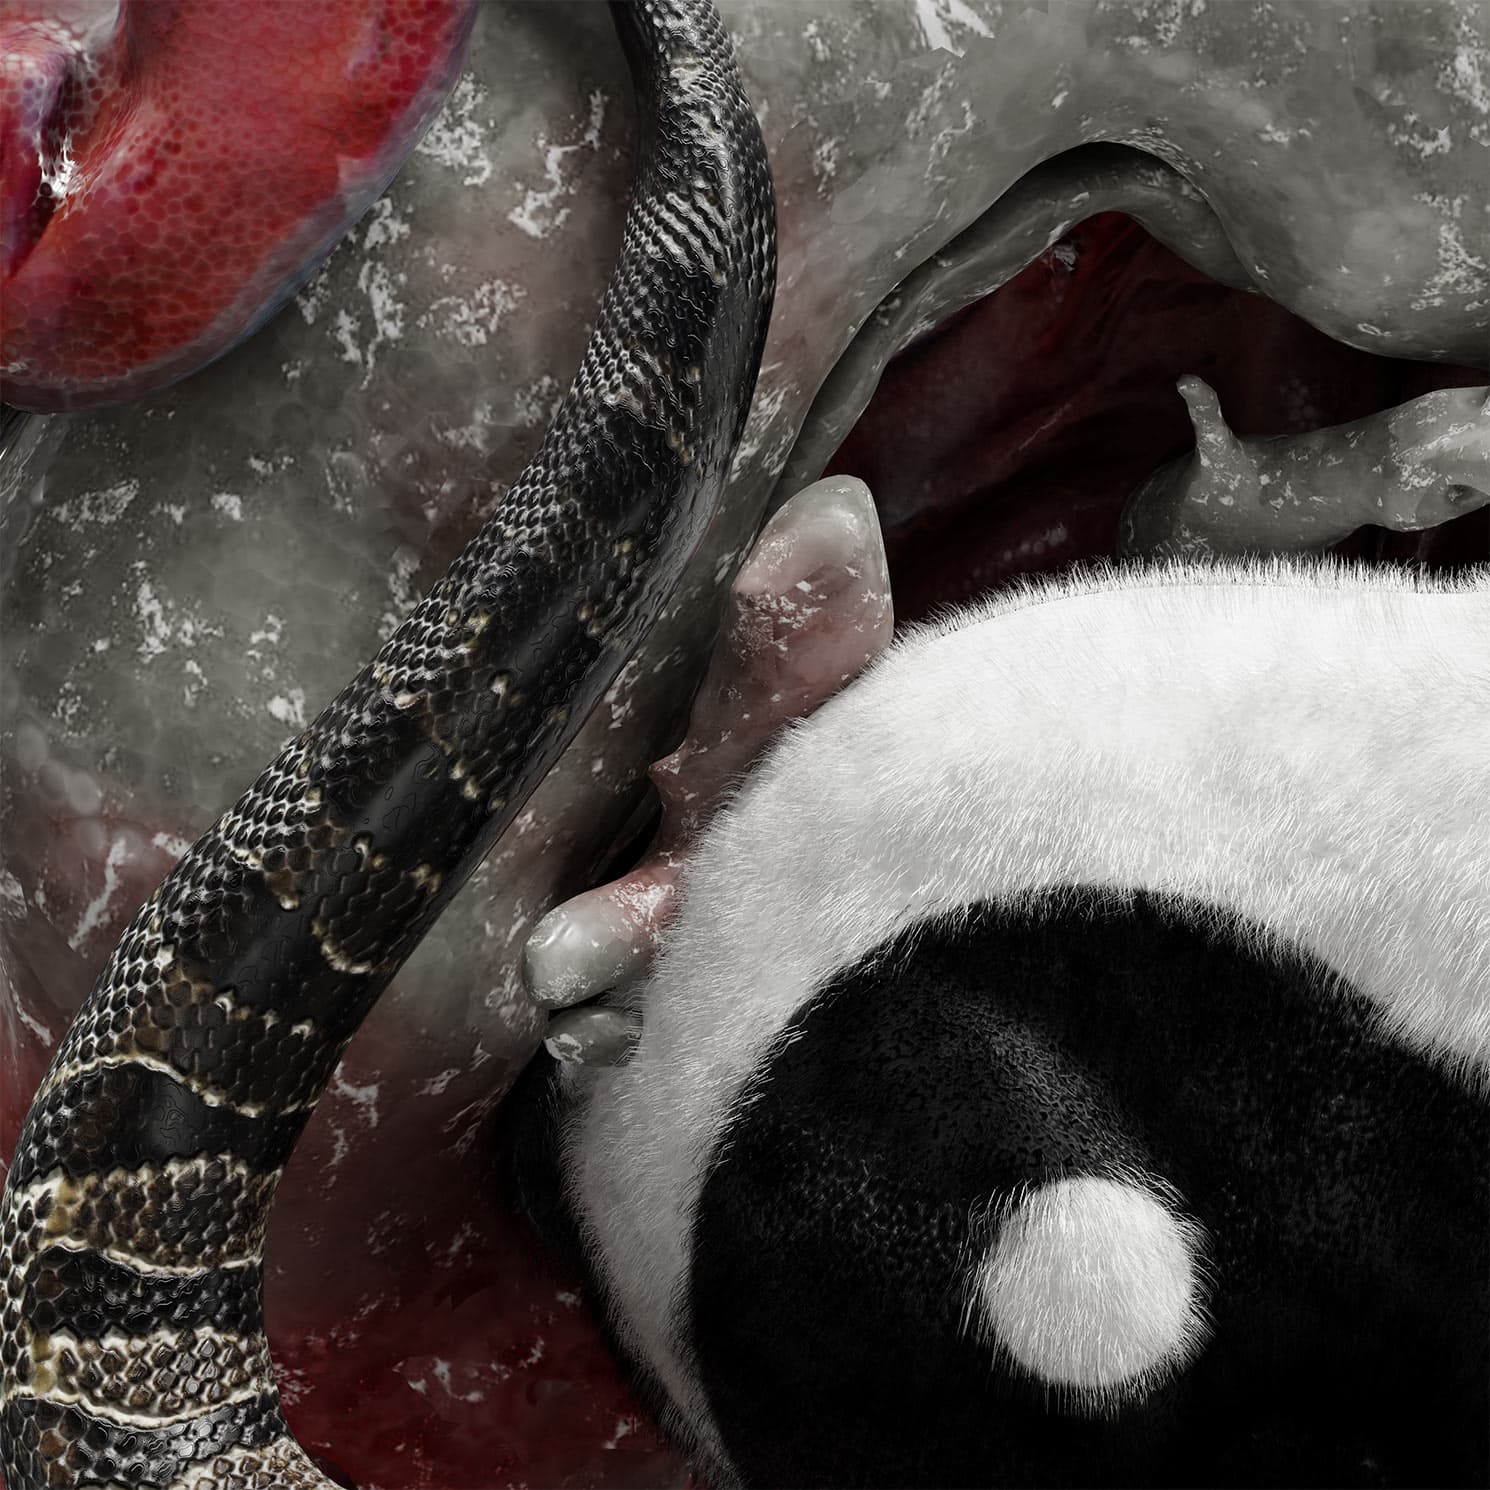 CGI close-up image of a snake tail next to a ying-yang themed rabbit tail